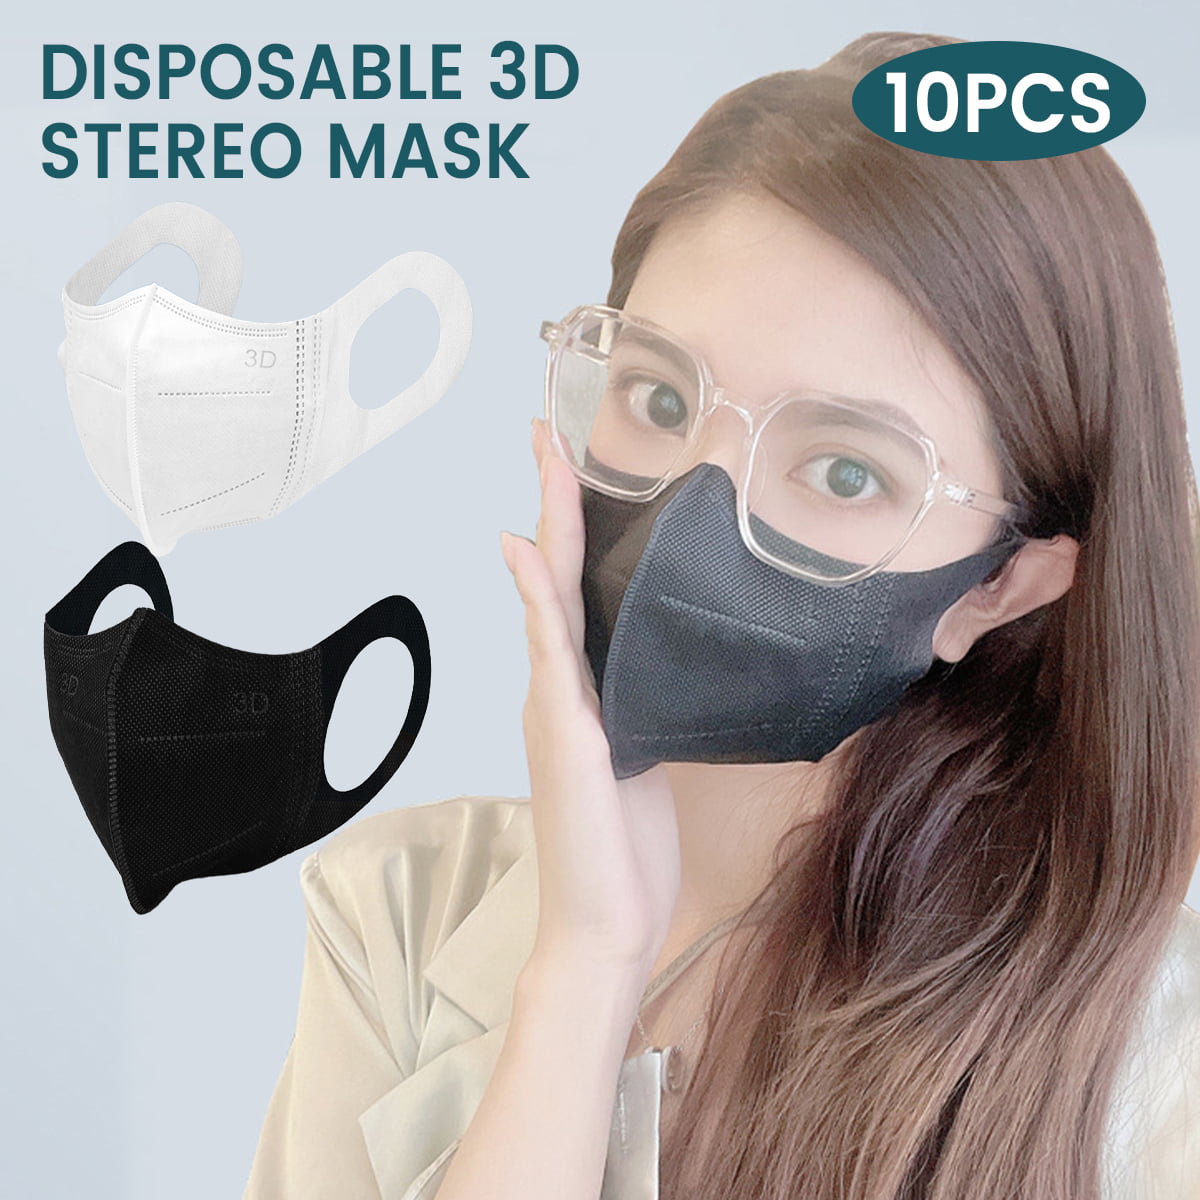 REUSABLE NEW 10PCS FACE MASK WHITE COLOR FABRIC USE WITH FACESHIELD. 